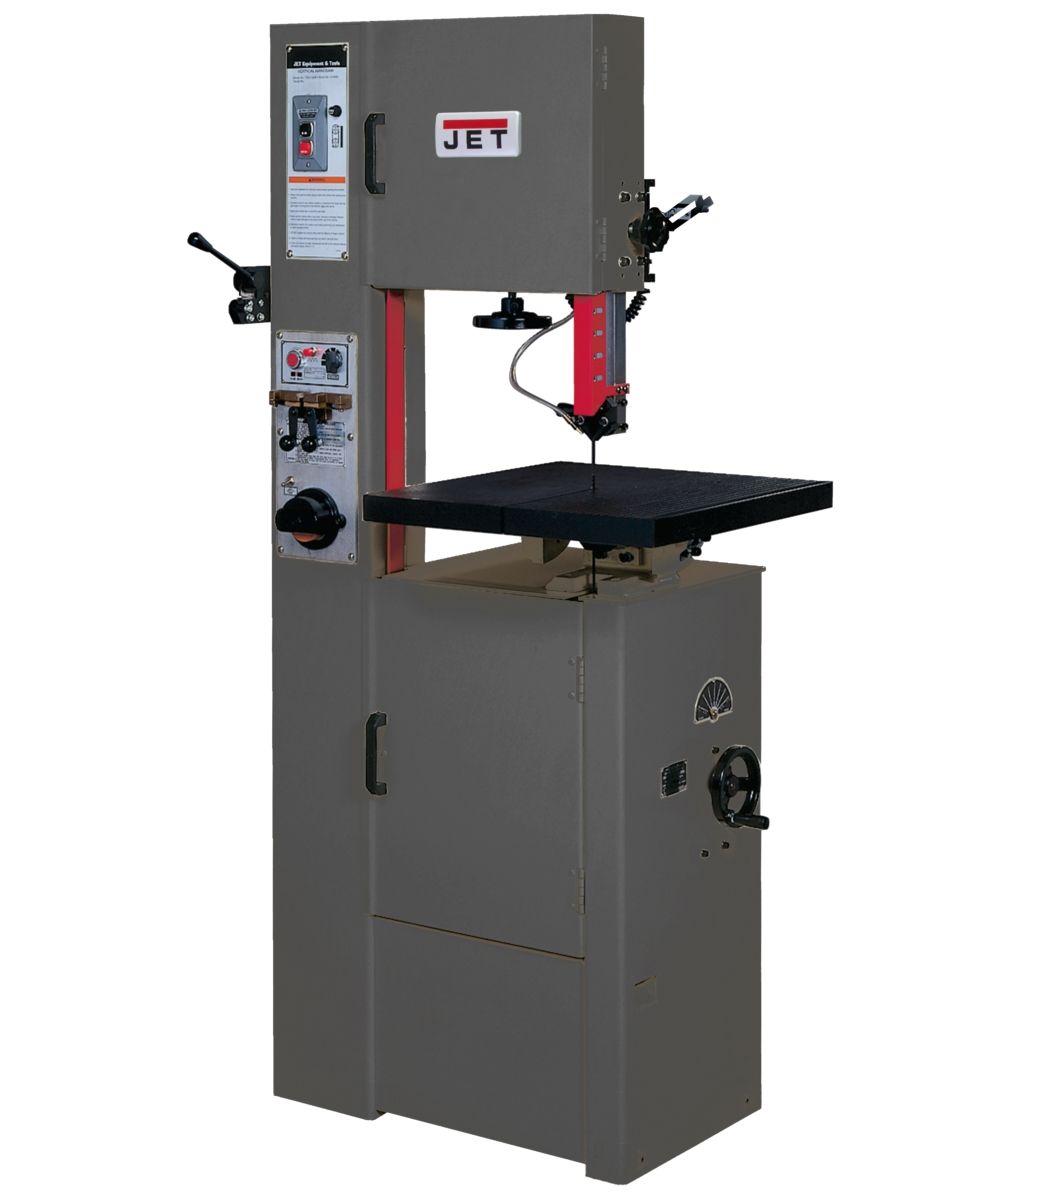 JET VBS-1408, 14" Vertical Band Saw